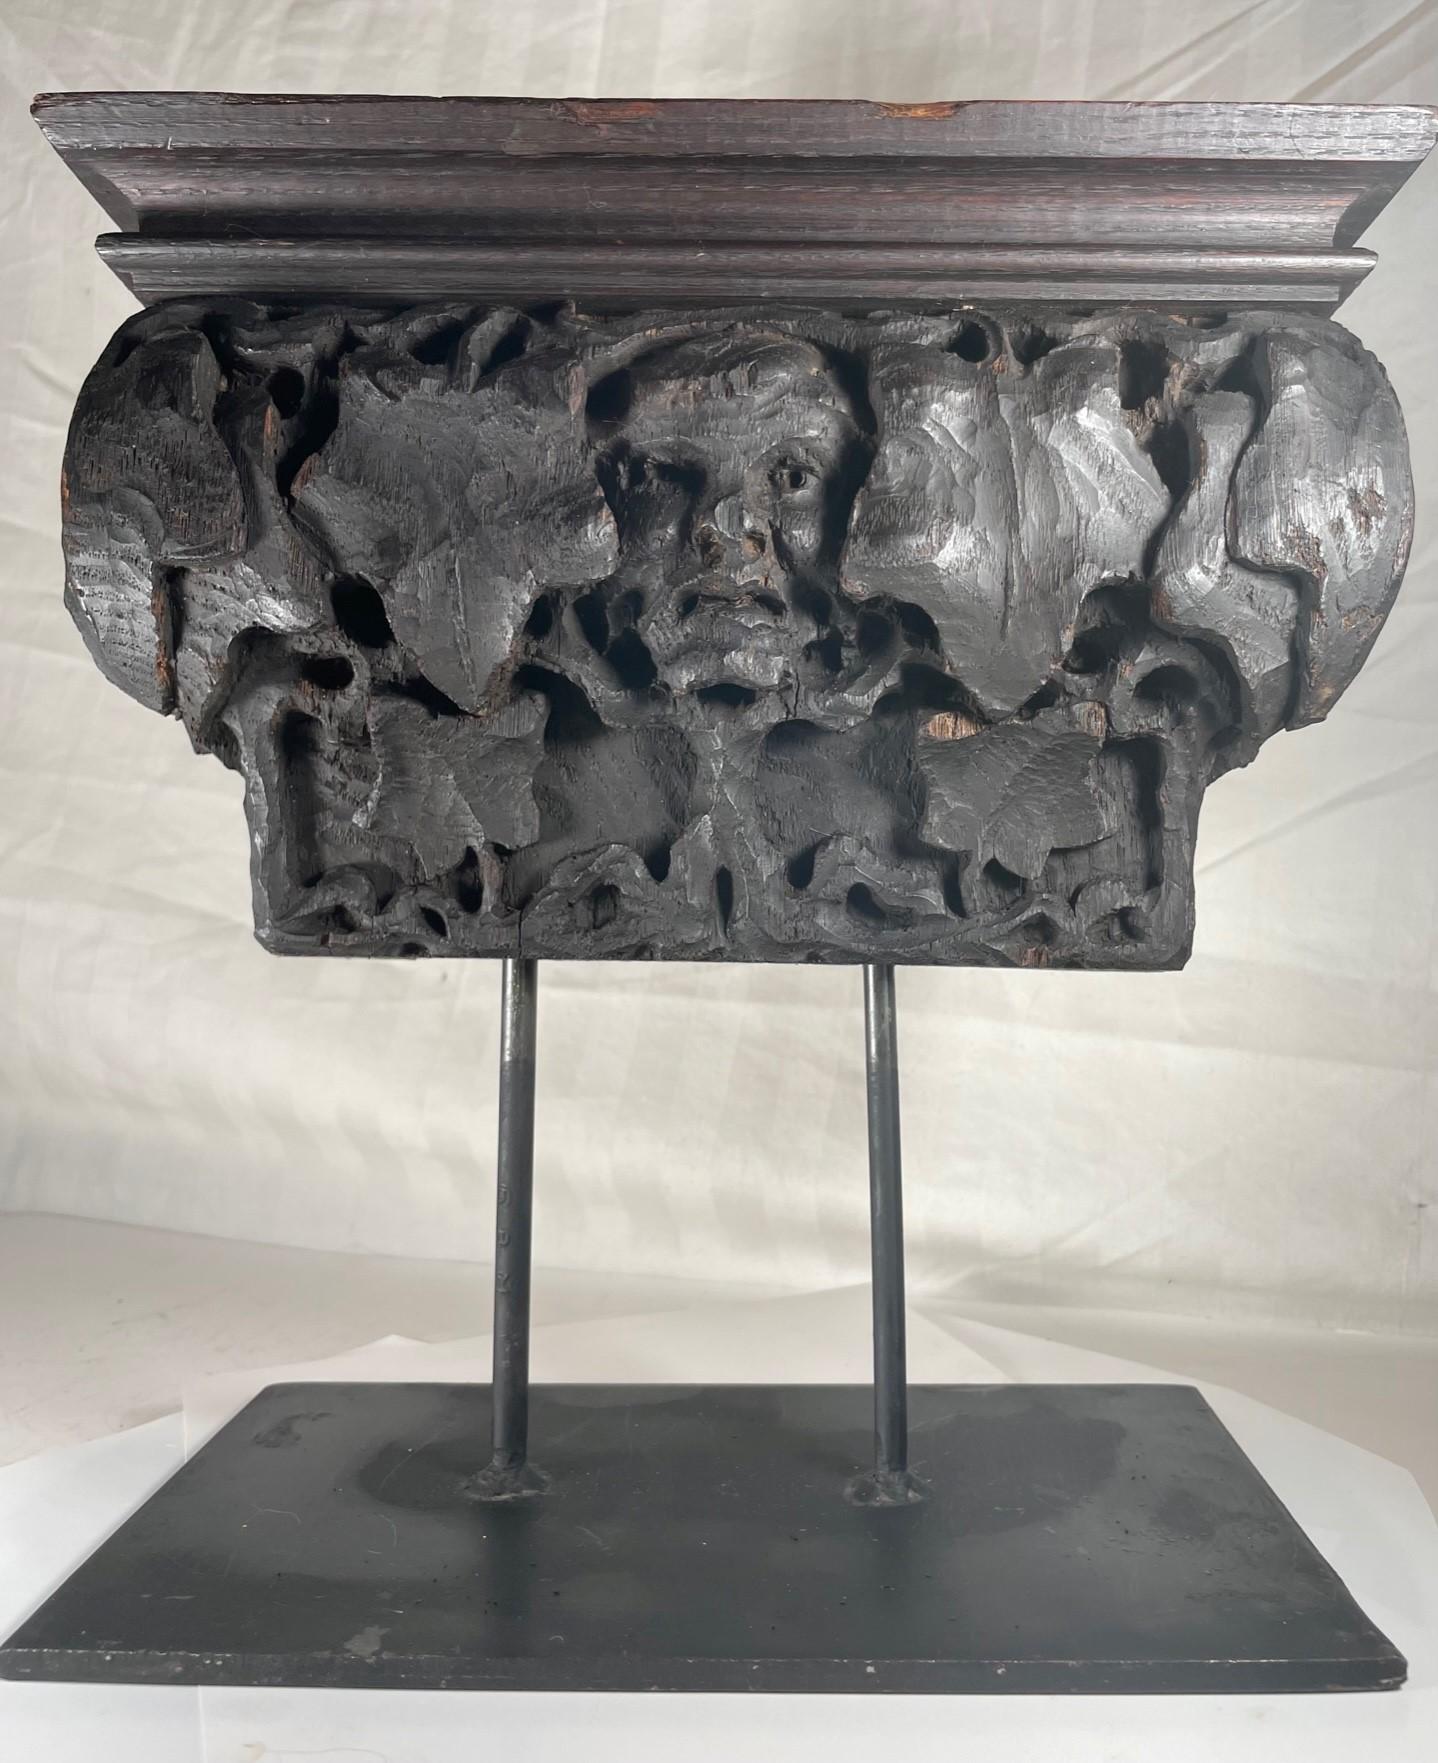 17th Century English carved oak corbel “The Green Man”.

Rare antique decorative architectural ornament of the enigmatic Green Man. Images and carvings can be found on ancient memorials, temples and cathedrals. Carving of the Green Man takes many